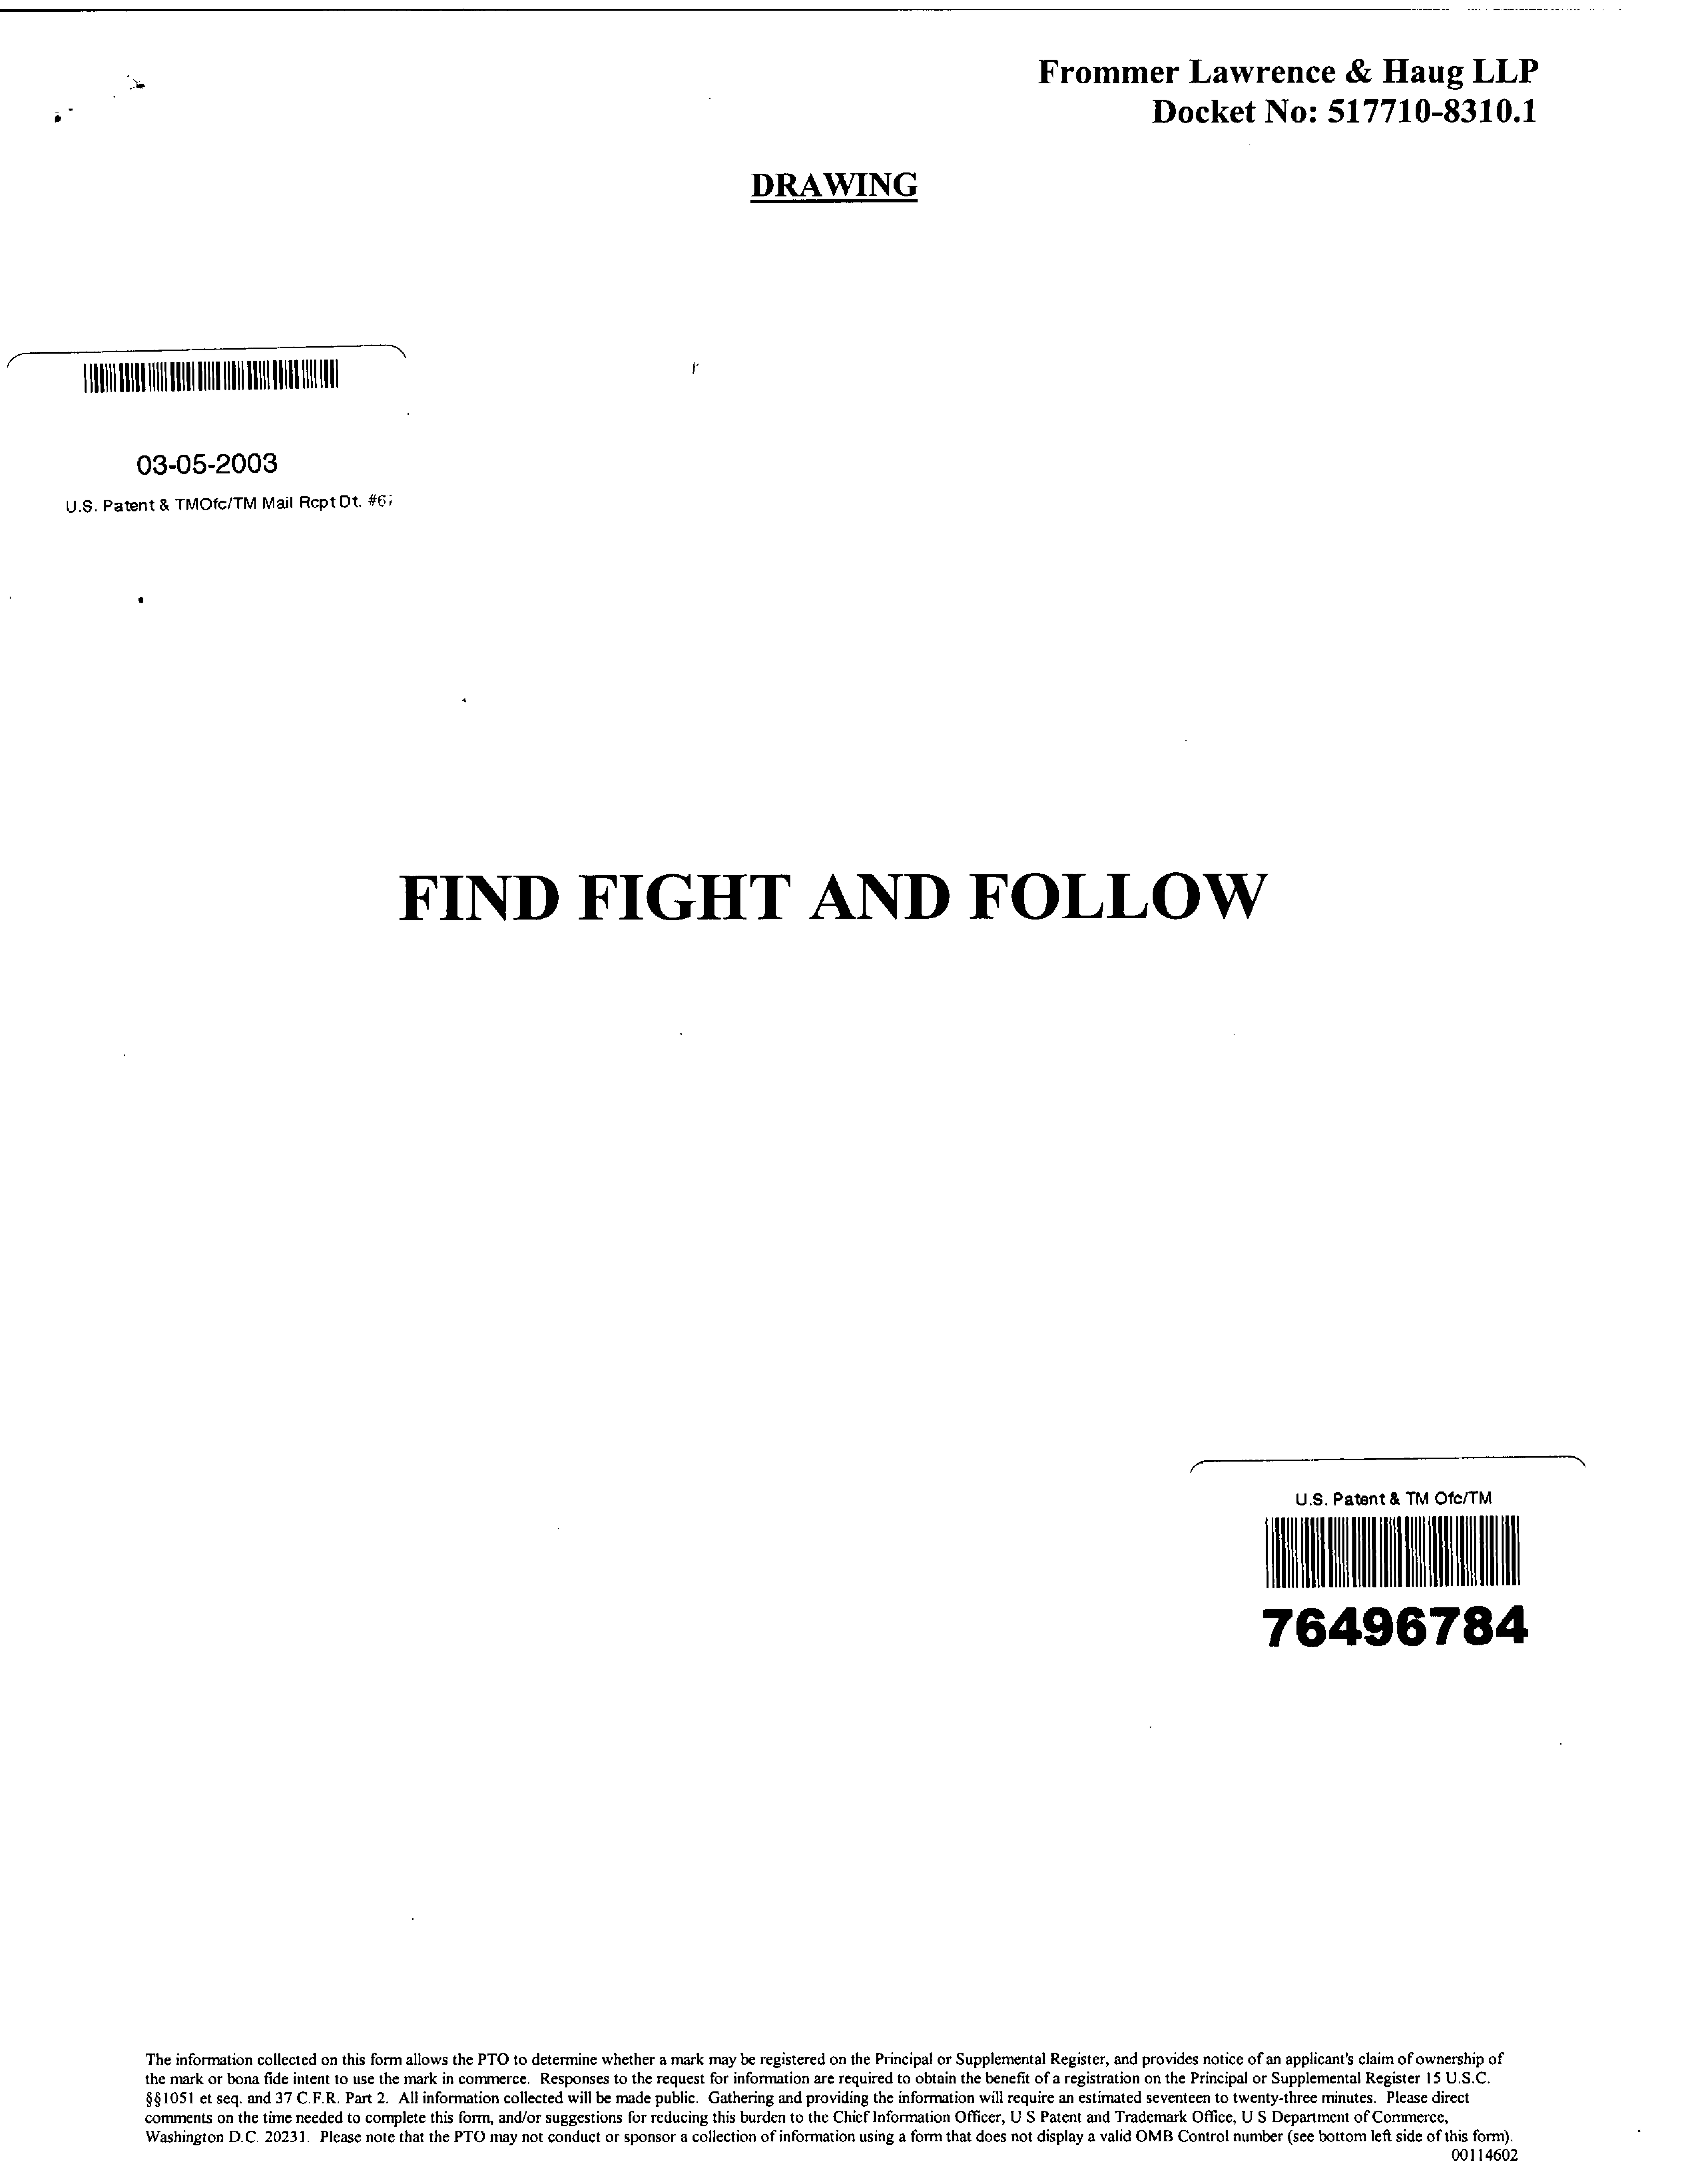 FIND FIGHT AND FOLLOW